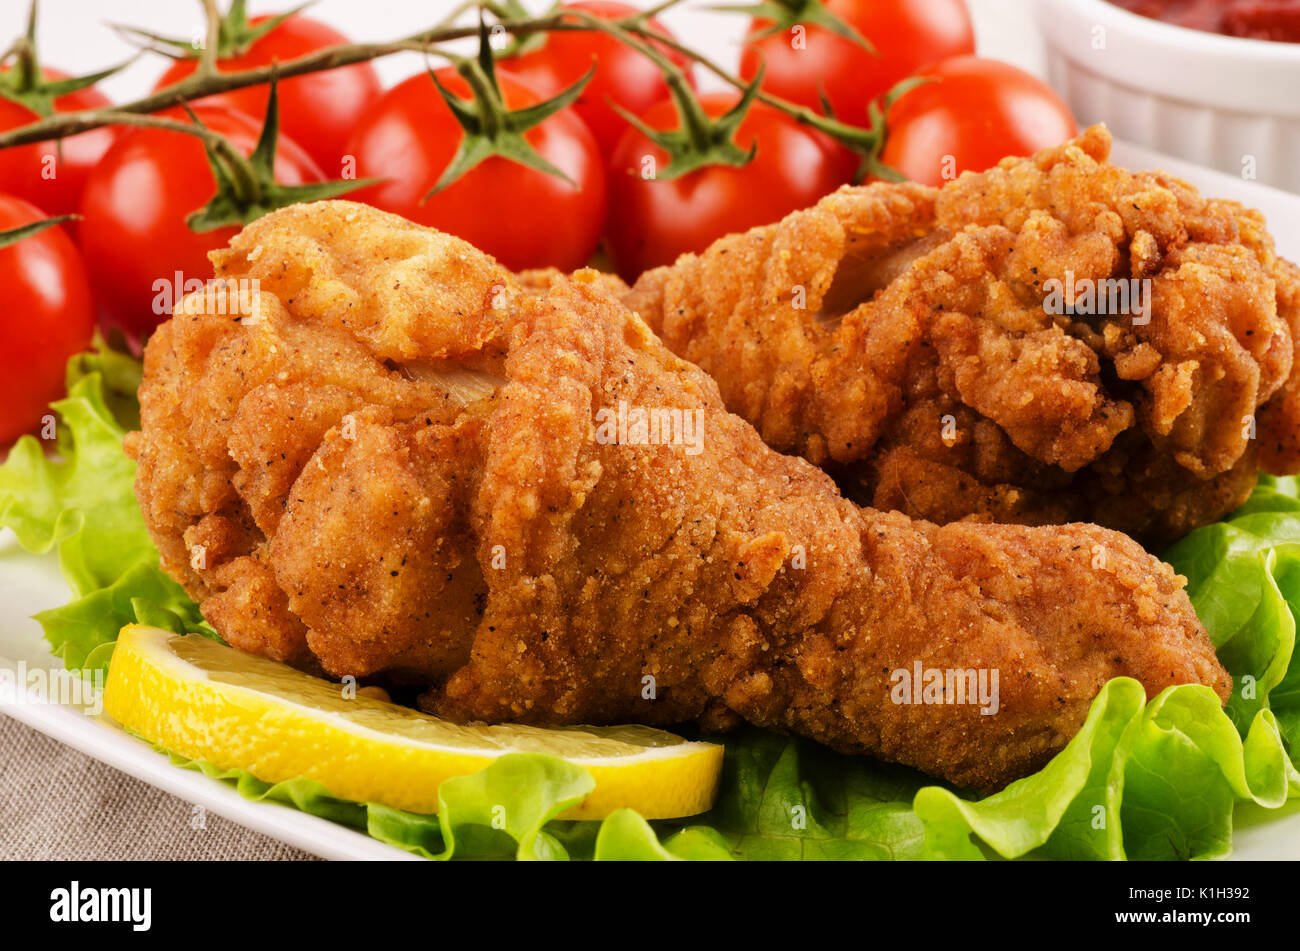 Chicken drumsticks in breadcrumbs with tomatoes and salad close-up Stock Photo